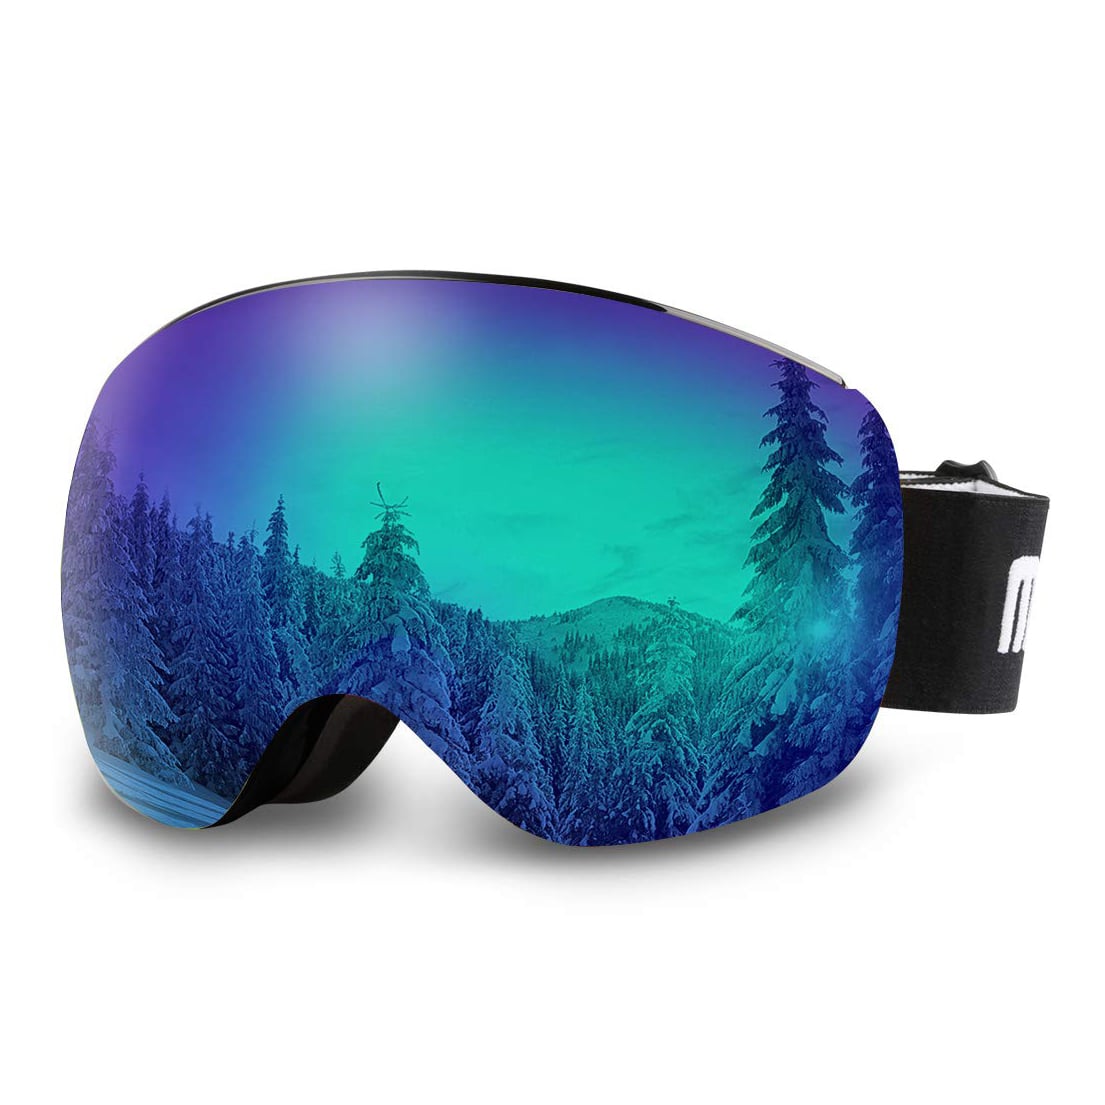 Top 10 Best Snowboard Goggles in 2021 Reviews Buyer’s Guide